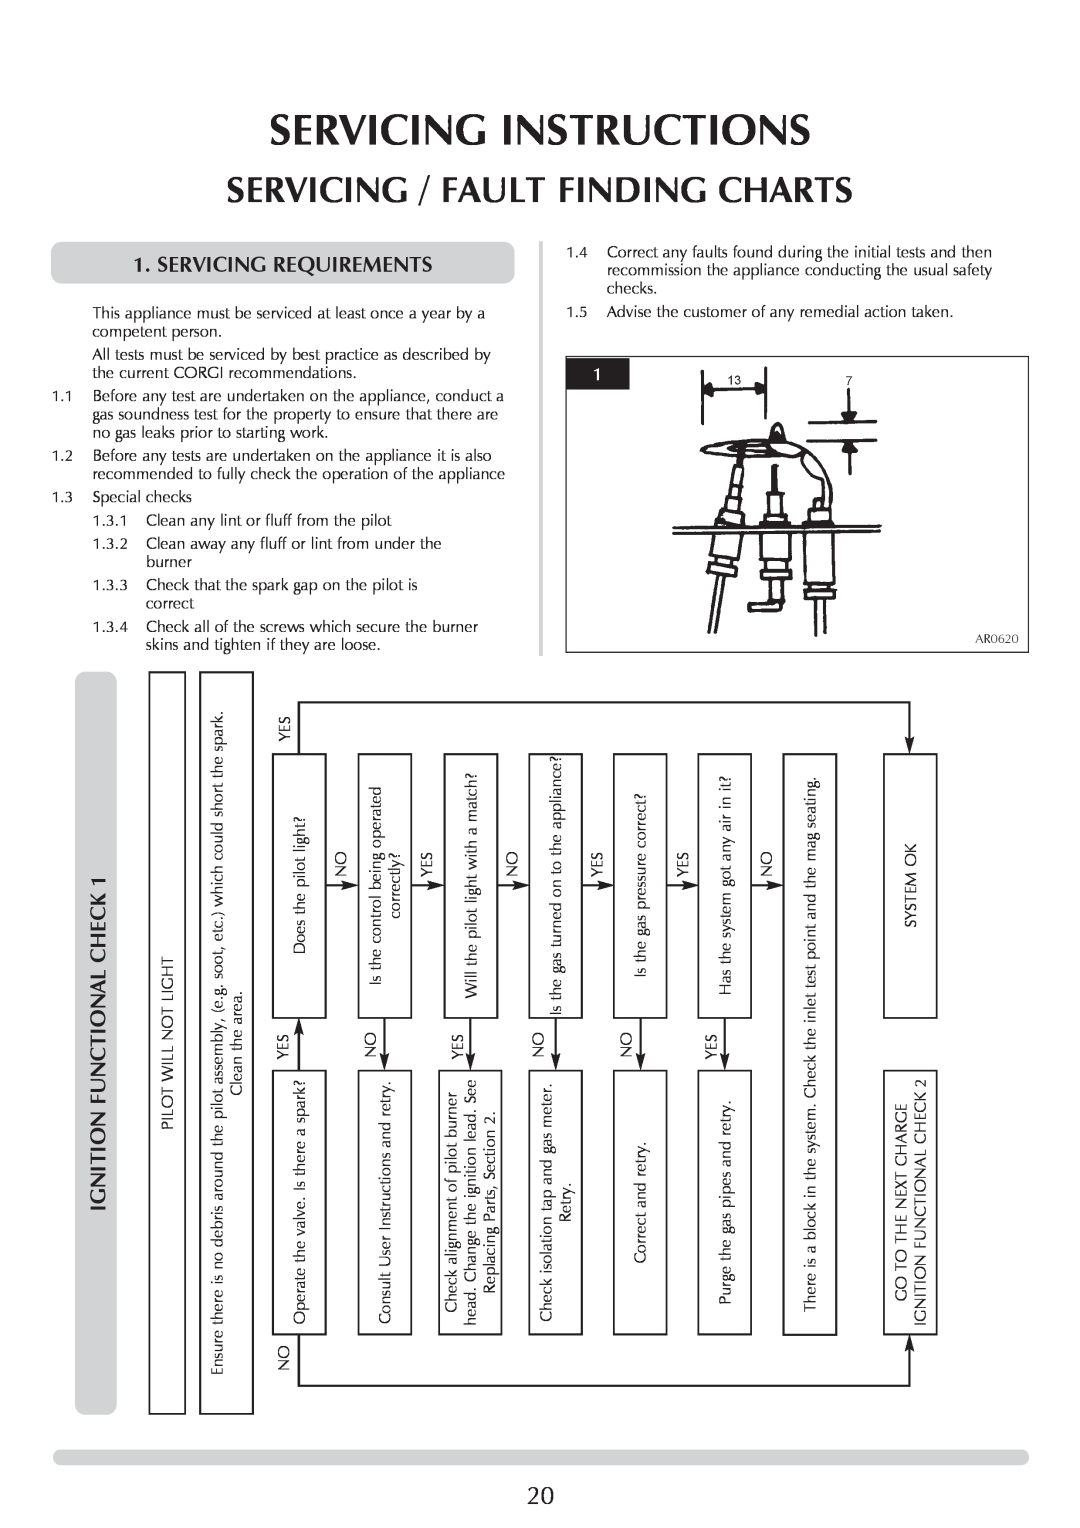 Stovax ASHDON 8546LUC-P8546LUC manual Servicing Instructions, Servicing / Fault Finding Charts, Servicing Requirements 